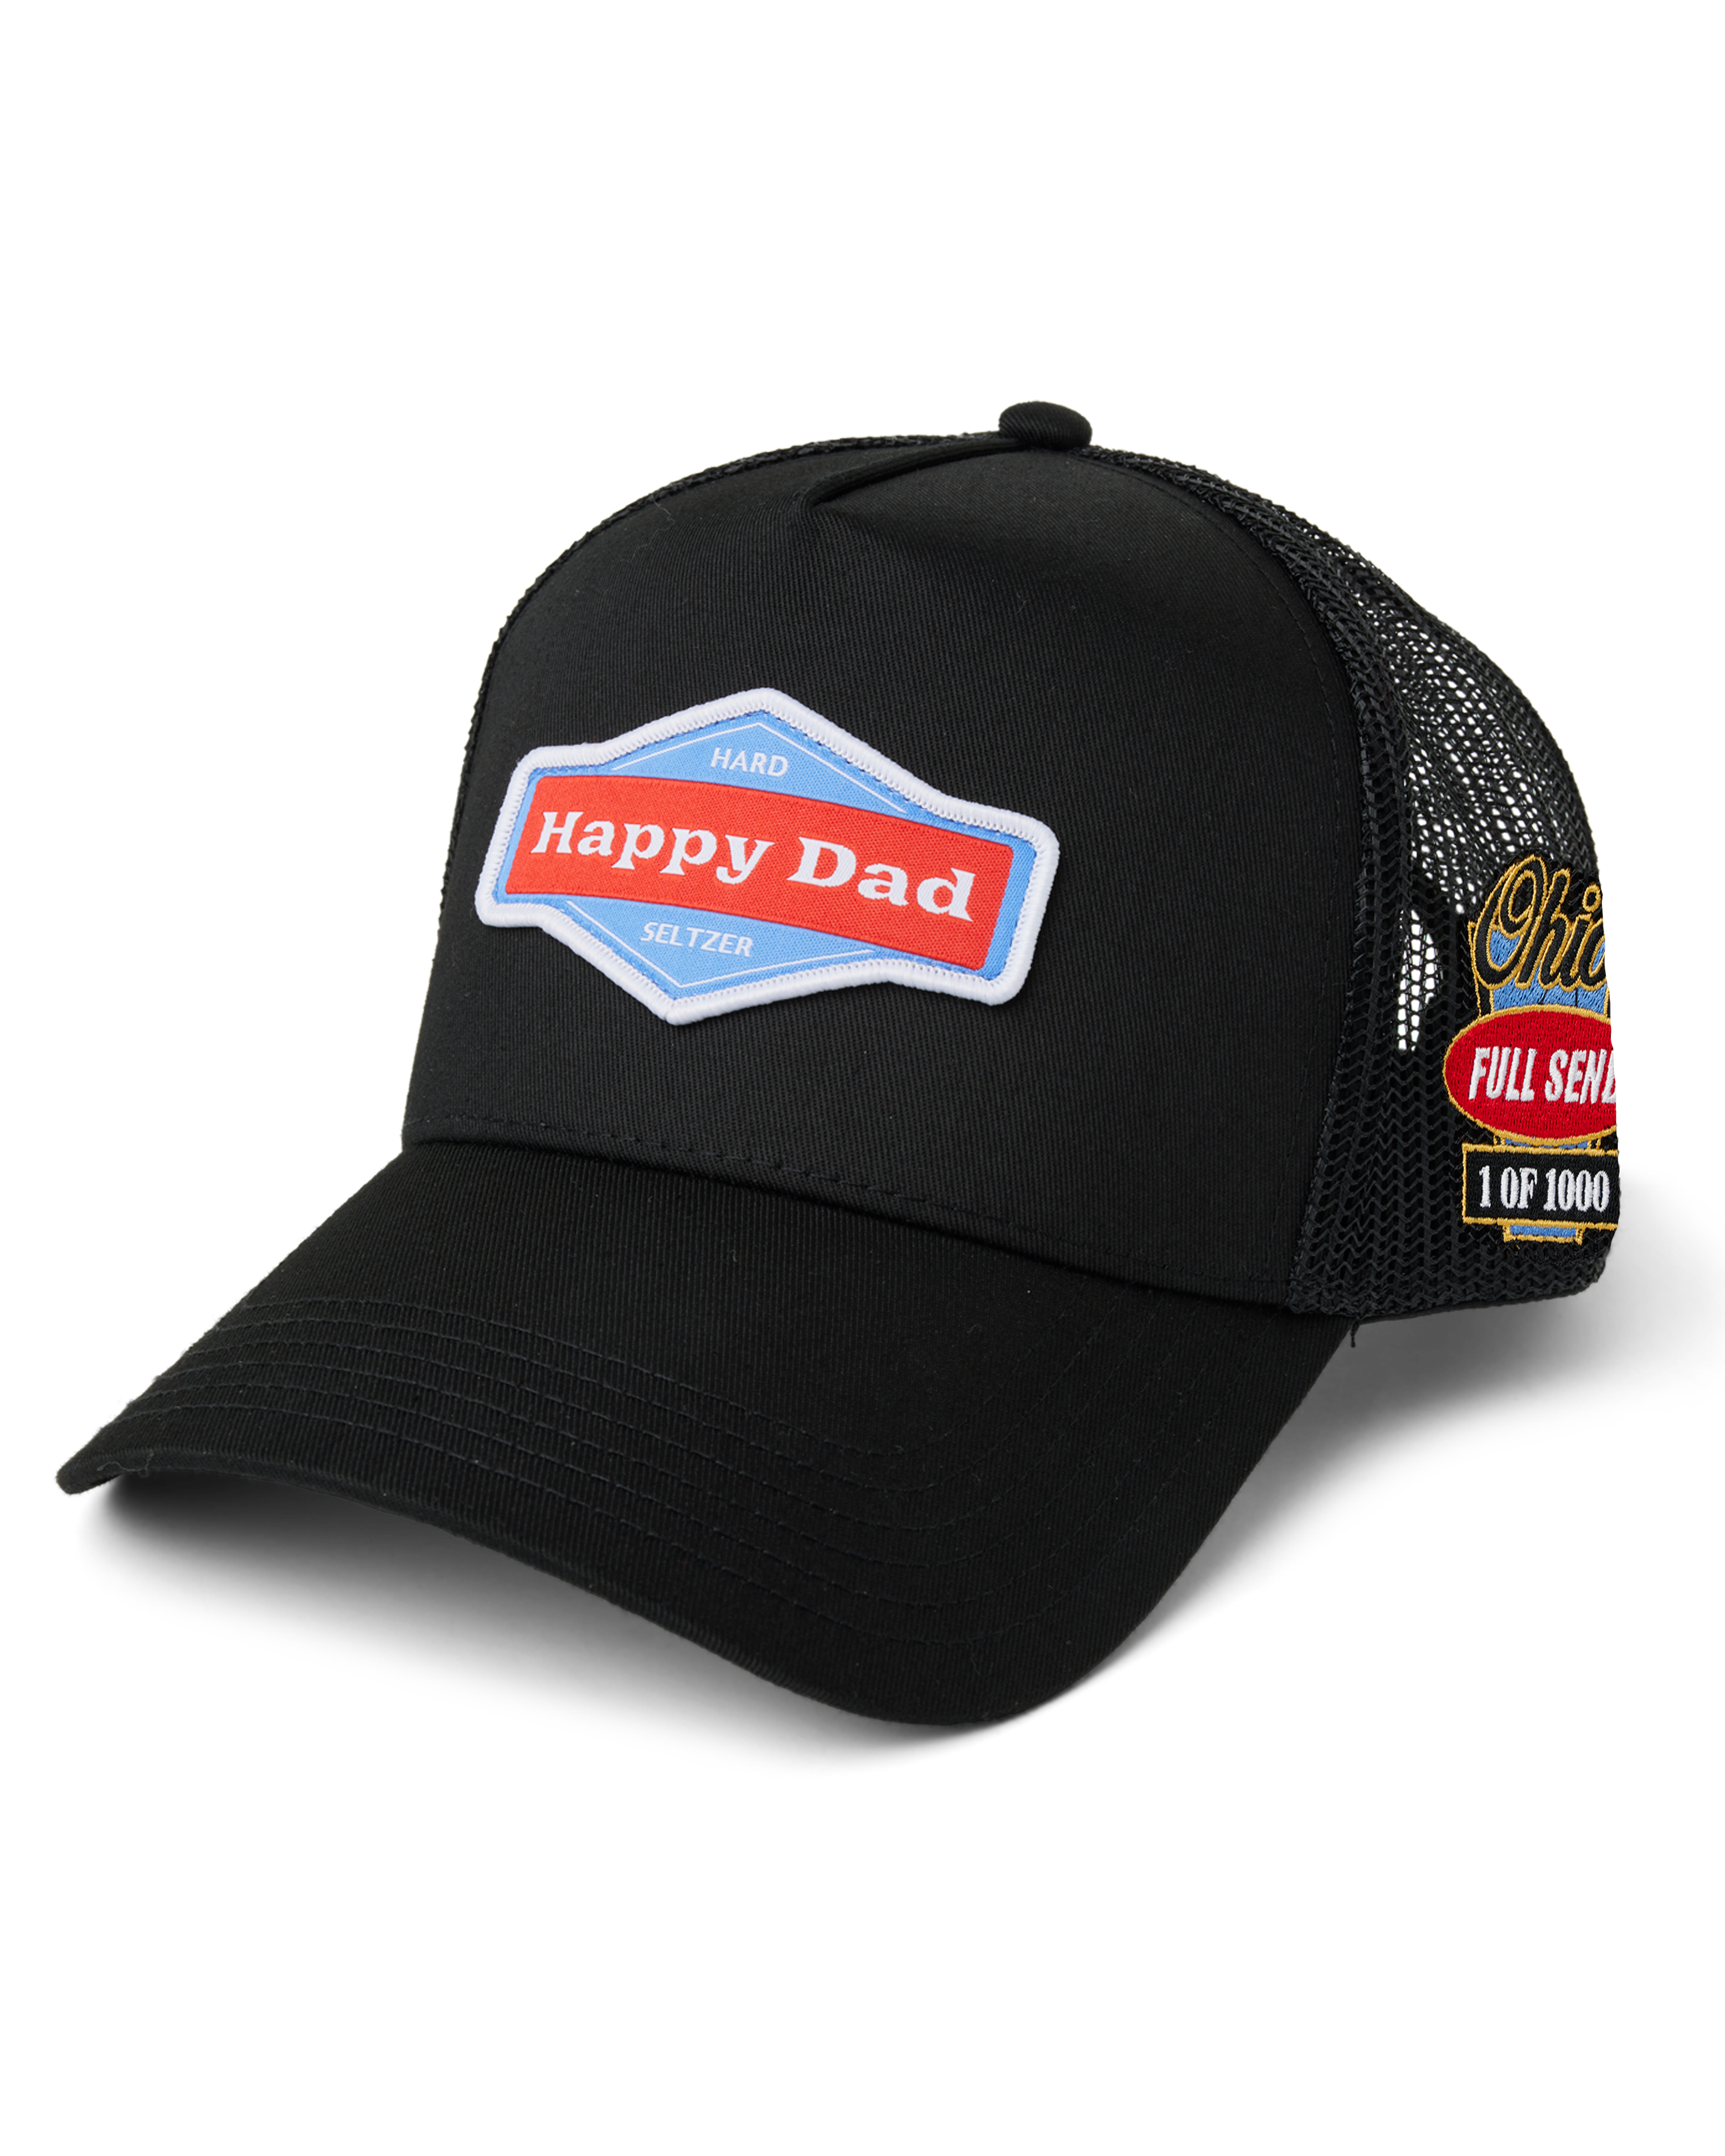 (Limited) Ohio - Happy Dad State Trucker Hat 1 of 1000